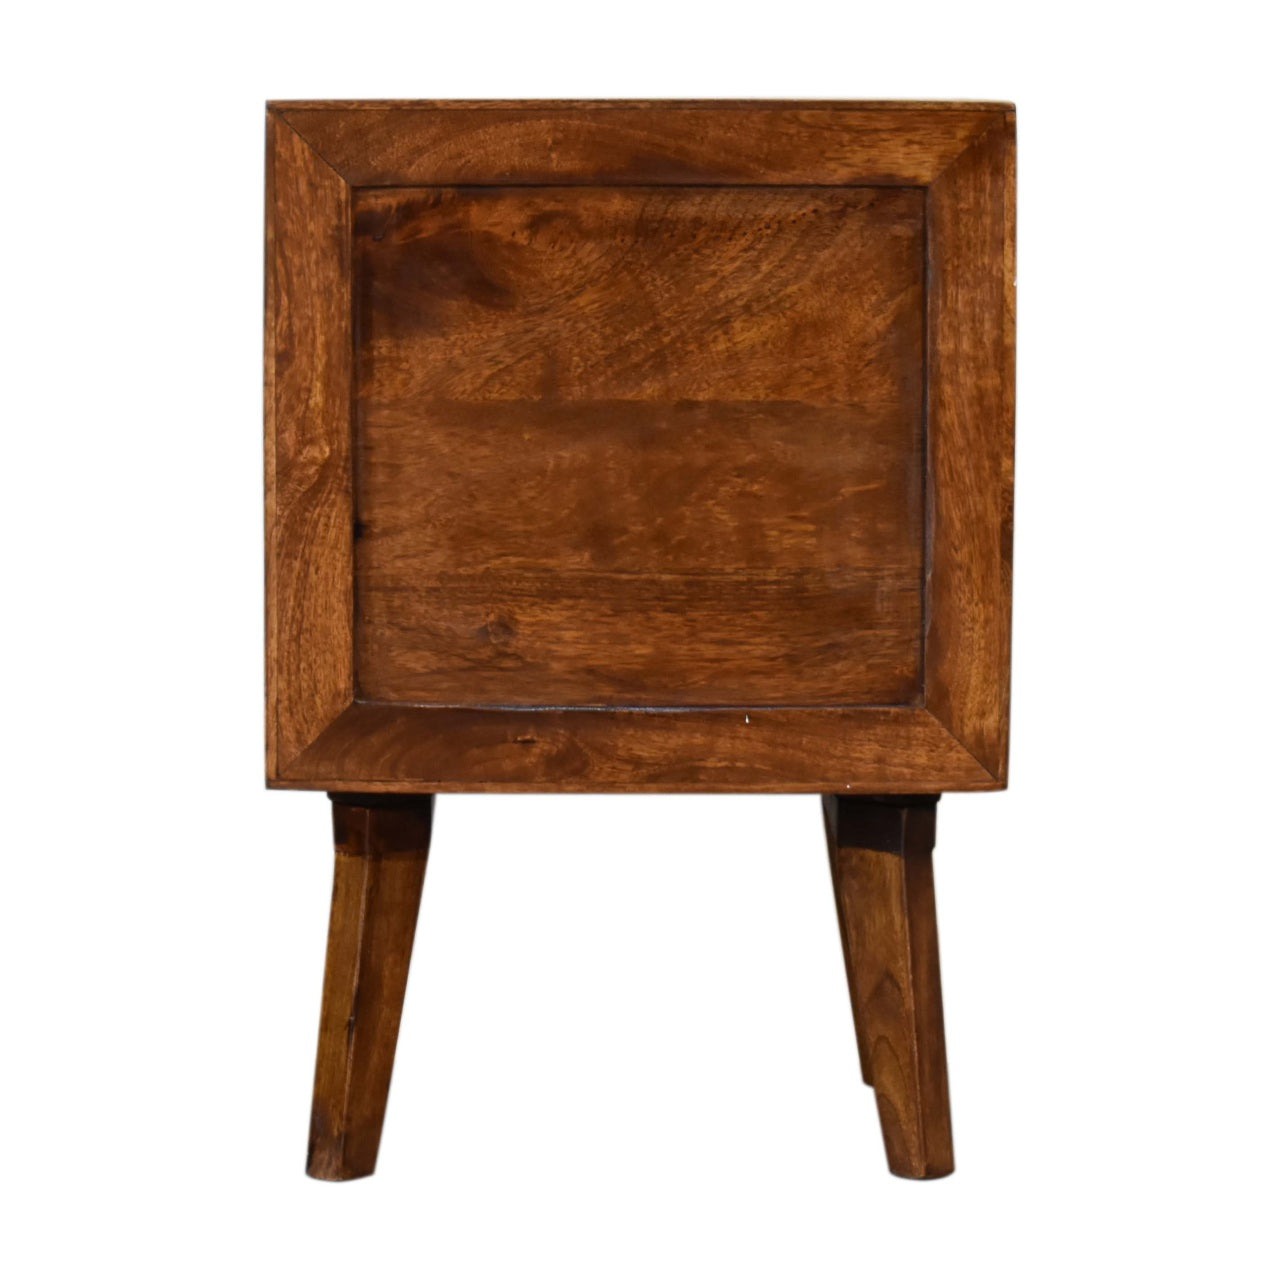 Diamond Cut Solid Wood Bedside Table In Chestnut Finish